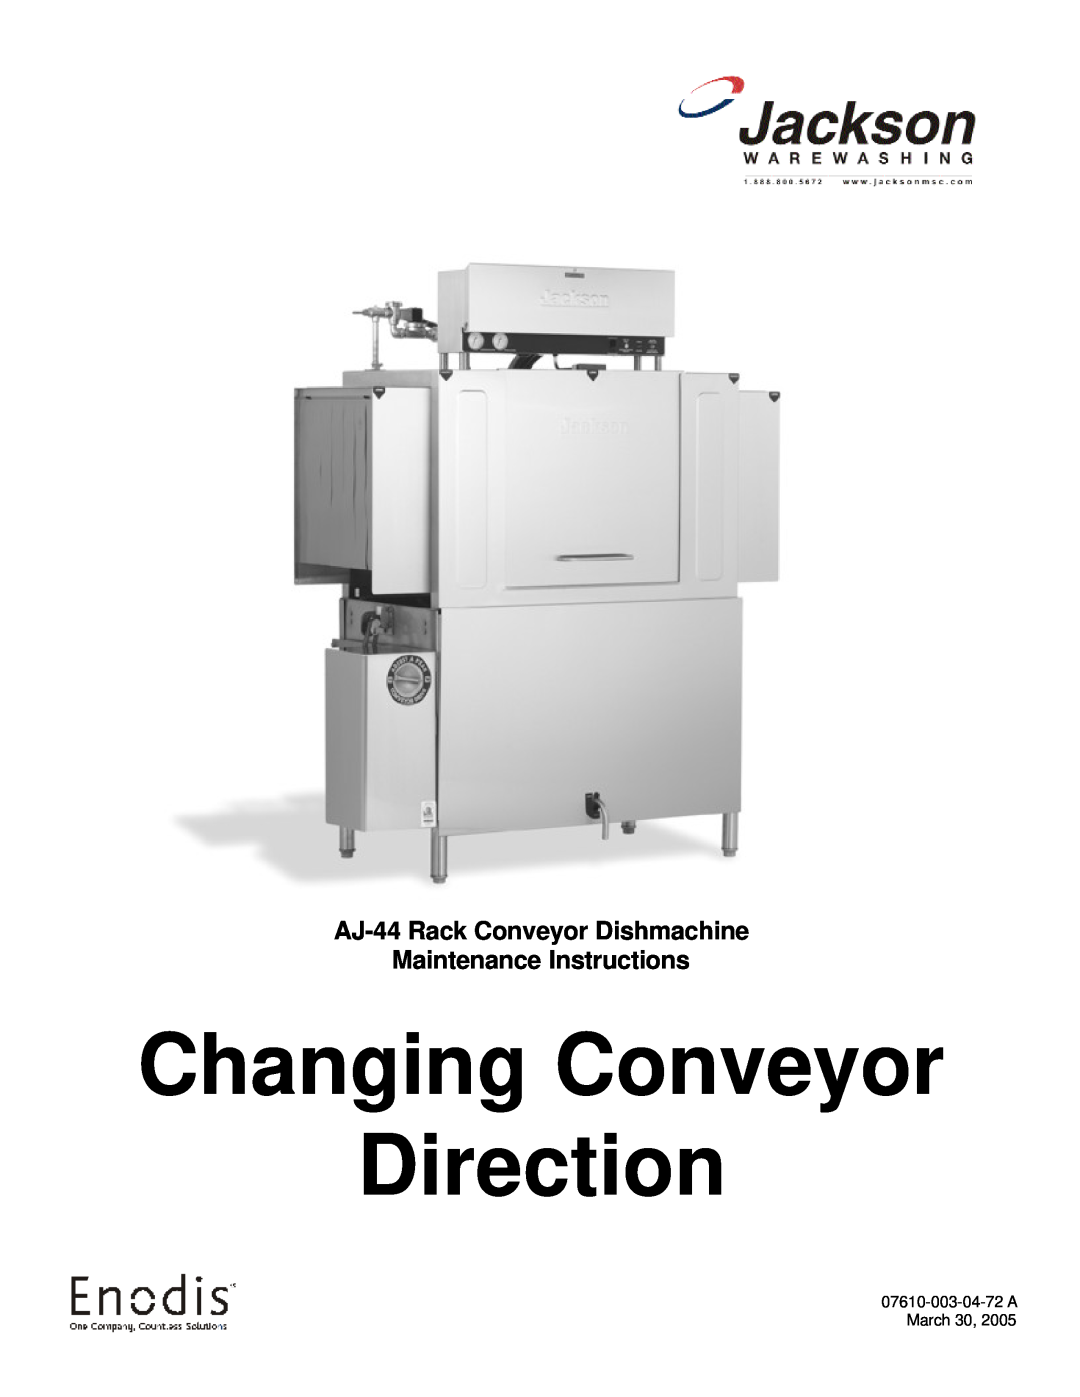 Jackson Rack Conveyor Dishmachine manual Motor Assembly Replacement, Maintenance Instructions, 07610-003-20-17March 